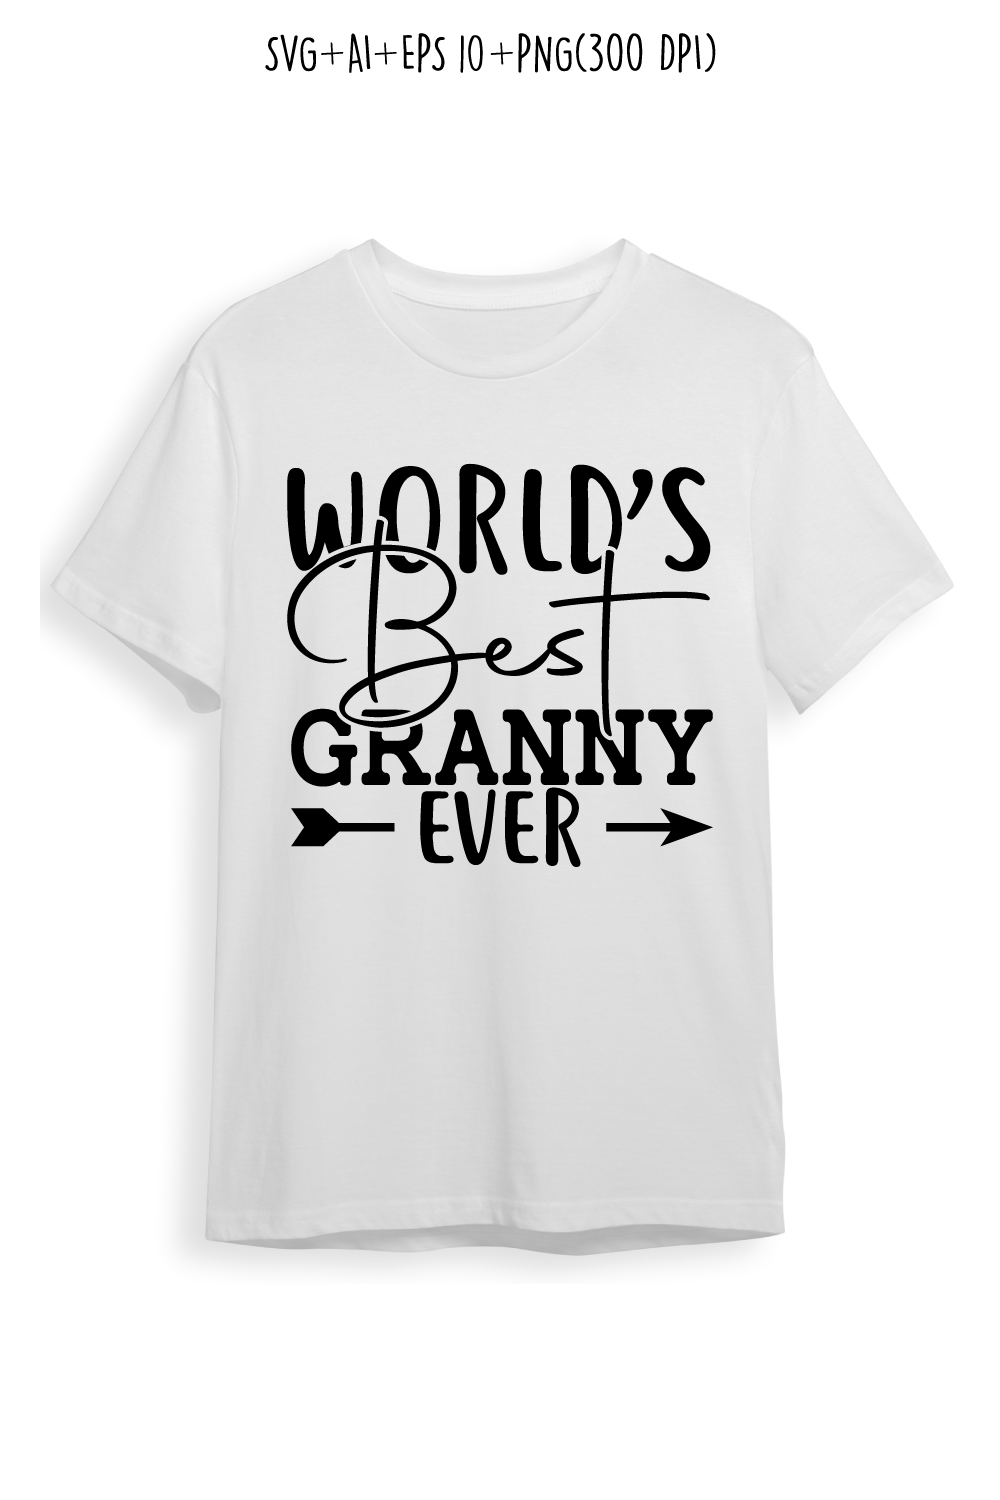 world's best granny ever SVG design for t-shirts, cards, frame artwork, phone cases, bags, mugs, stickers, tumblers, print, etc pinterest preview image.